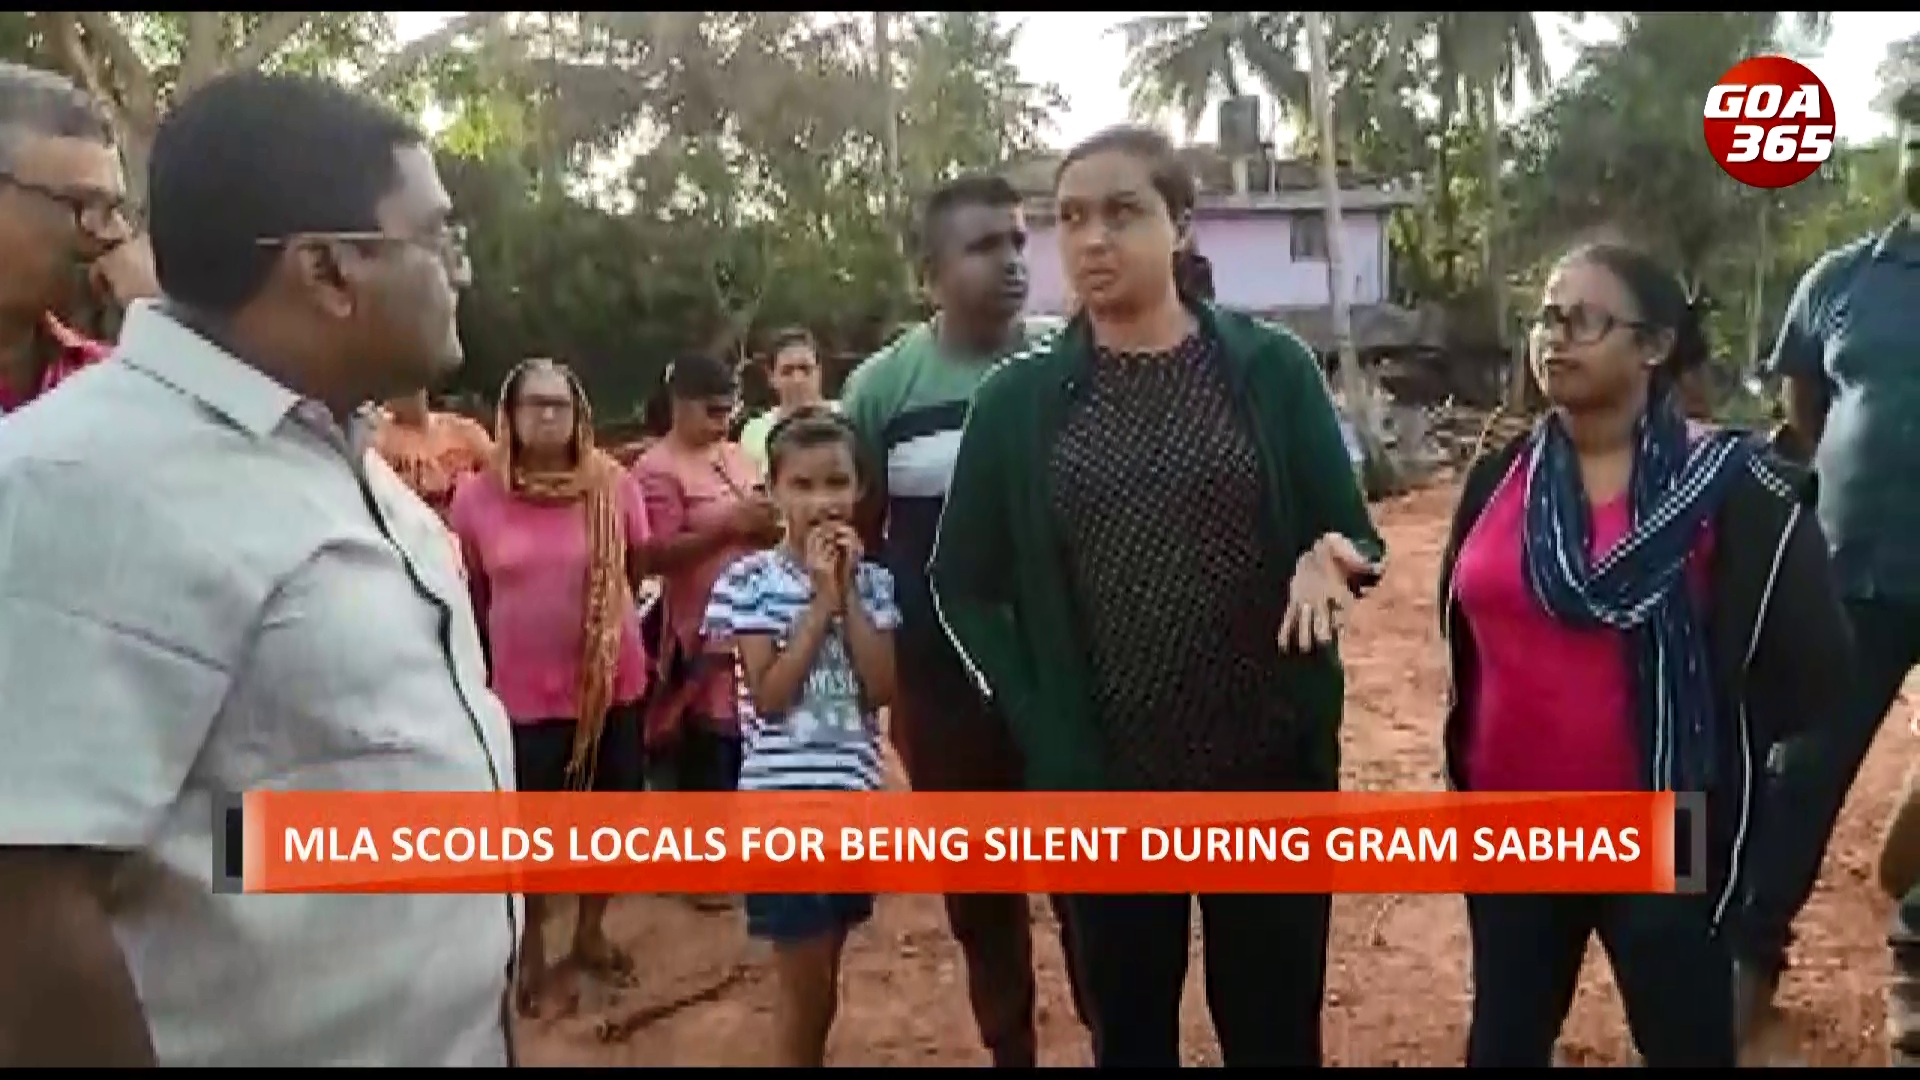 MLA loses cool with locals, p’yat over delay in filing case against western bypass: WATCH || ENGLISH || GOA365